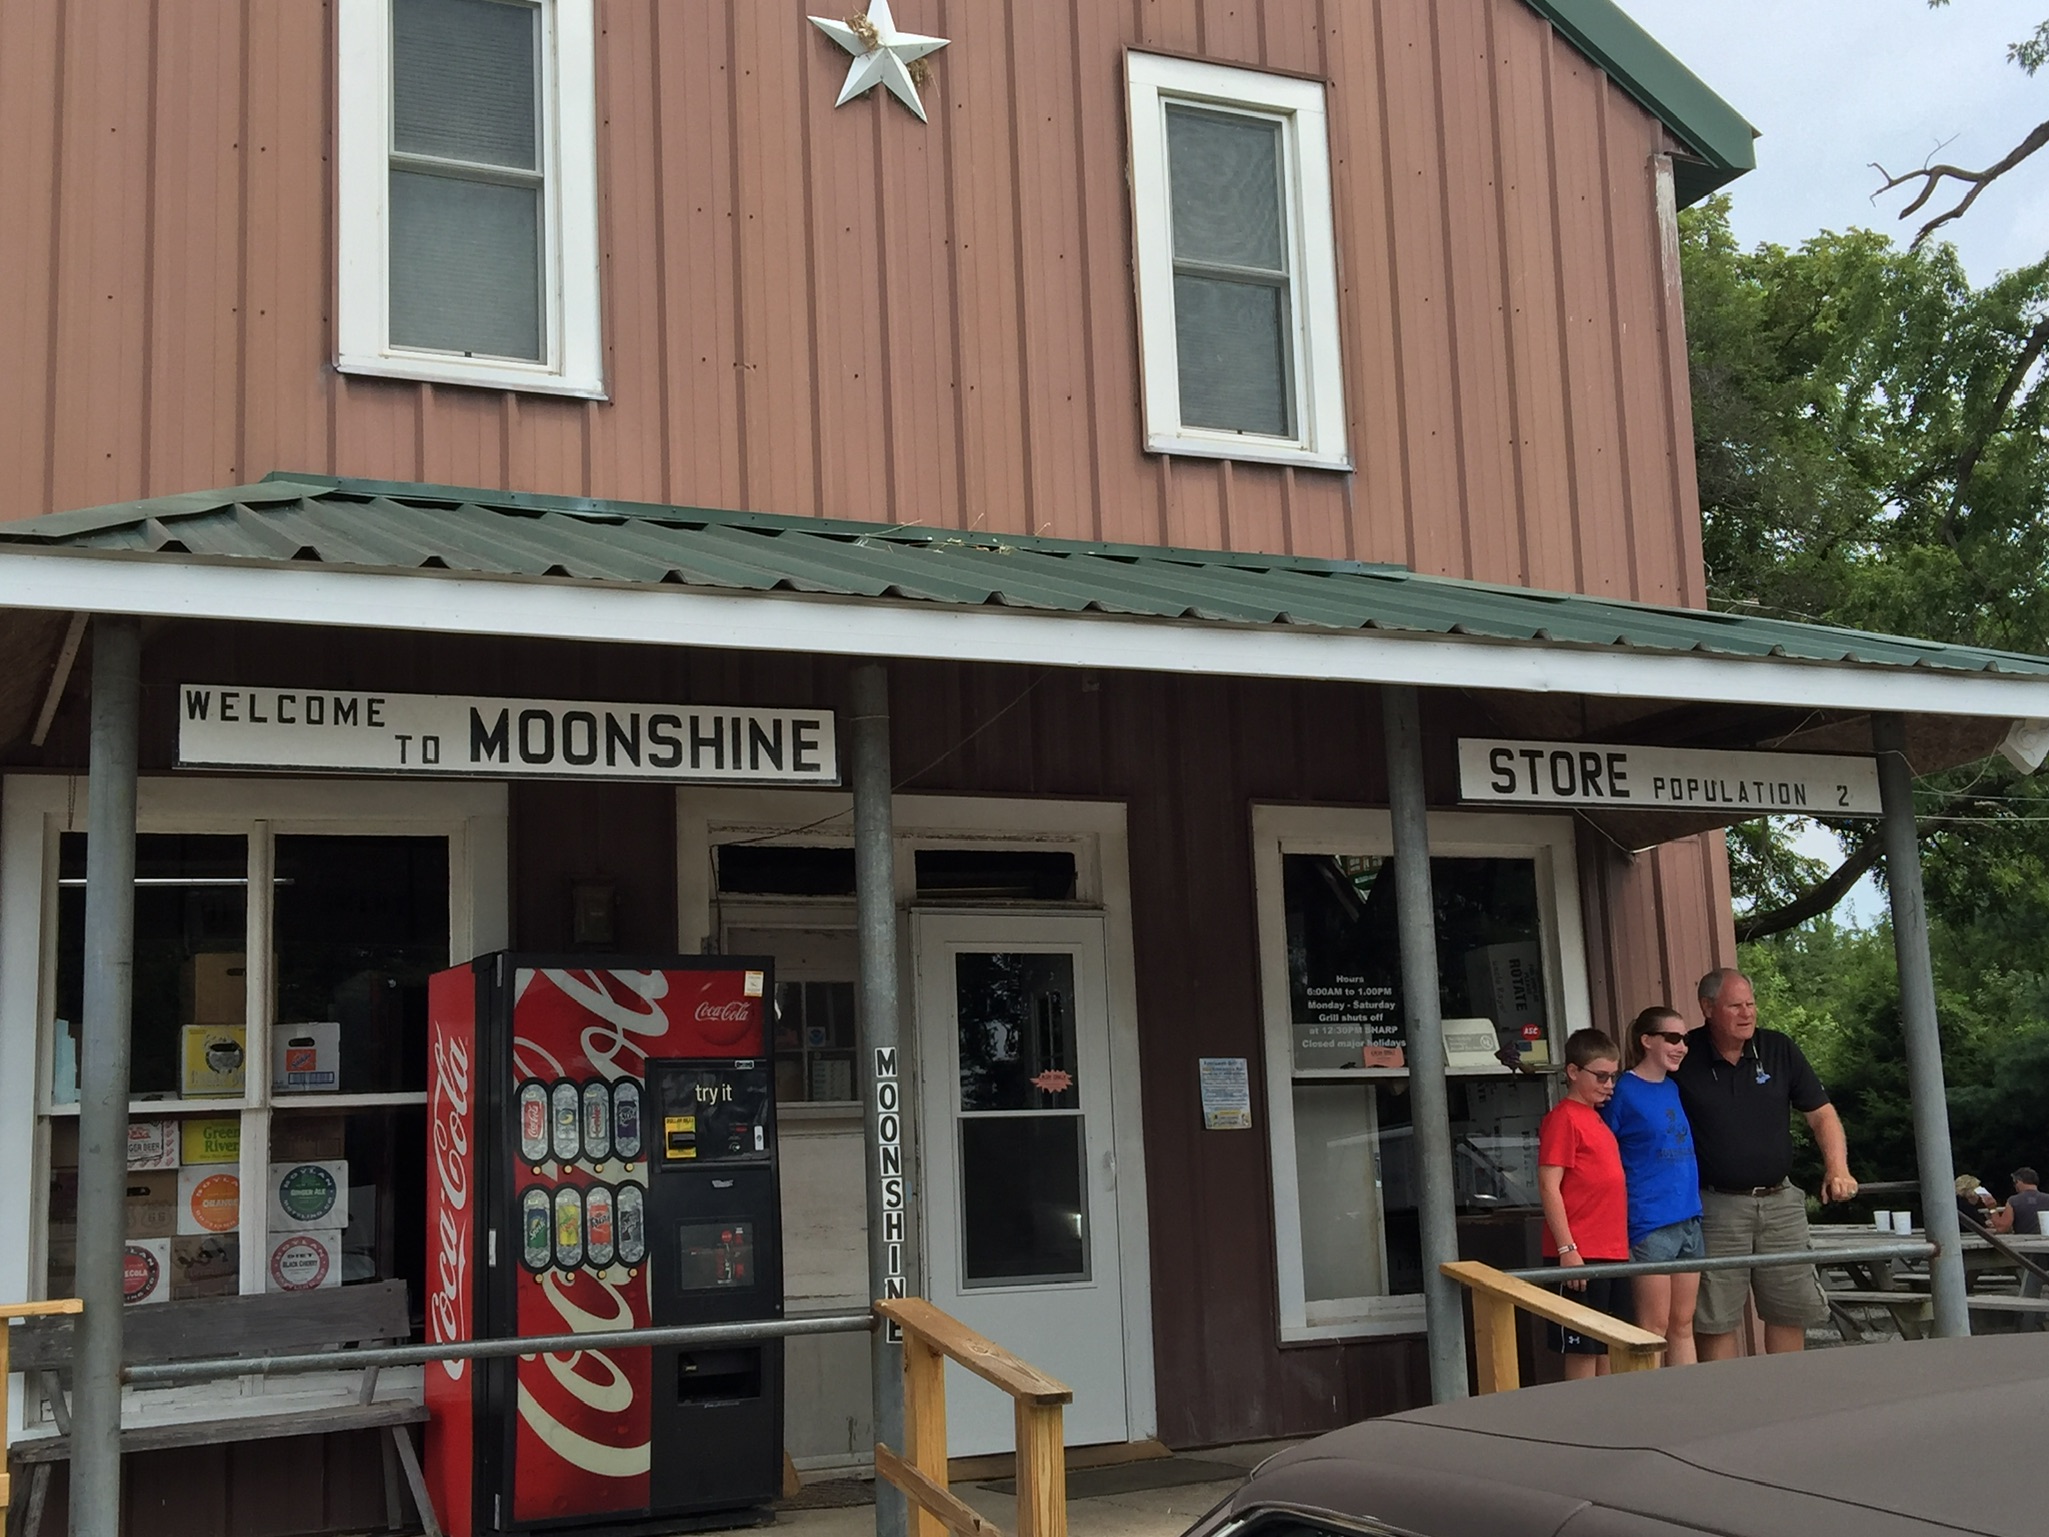 Clark County Day Trip One:  Moonshine & Casey, IL – A cure for the COVID blues (15 miles)